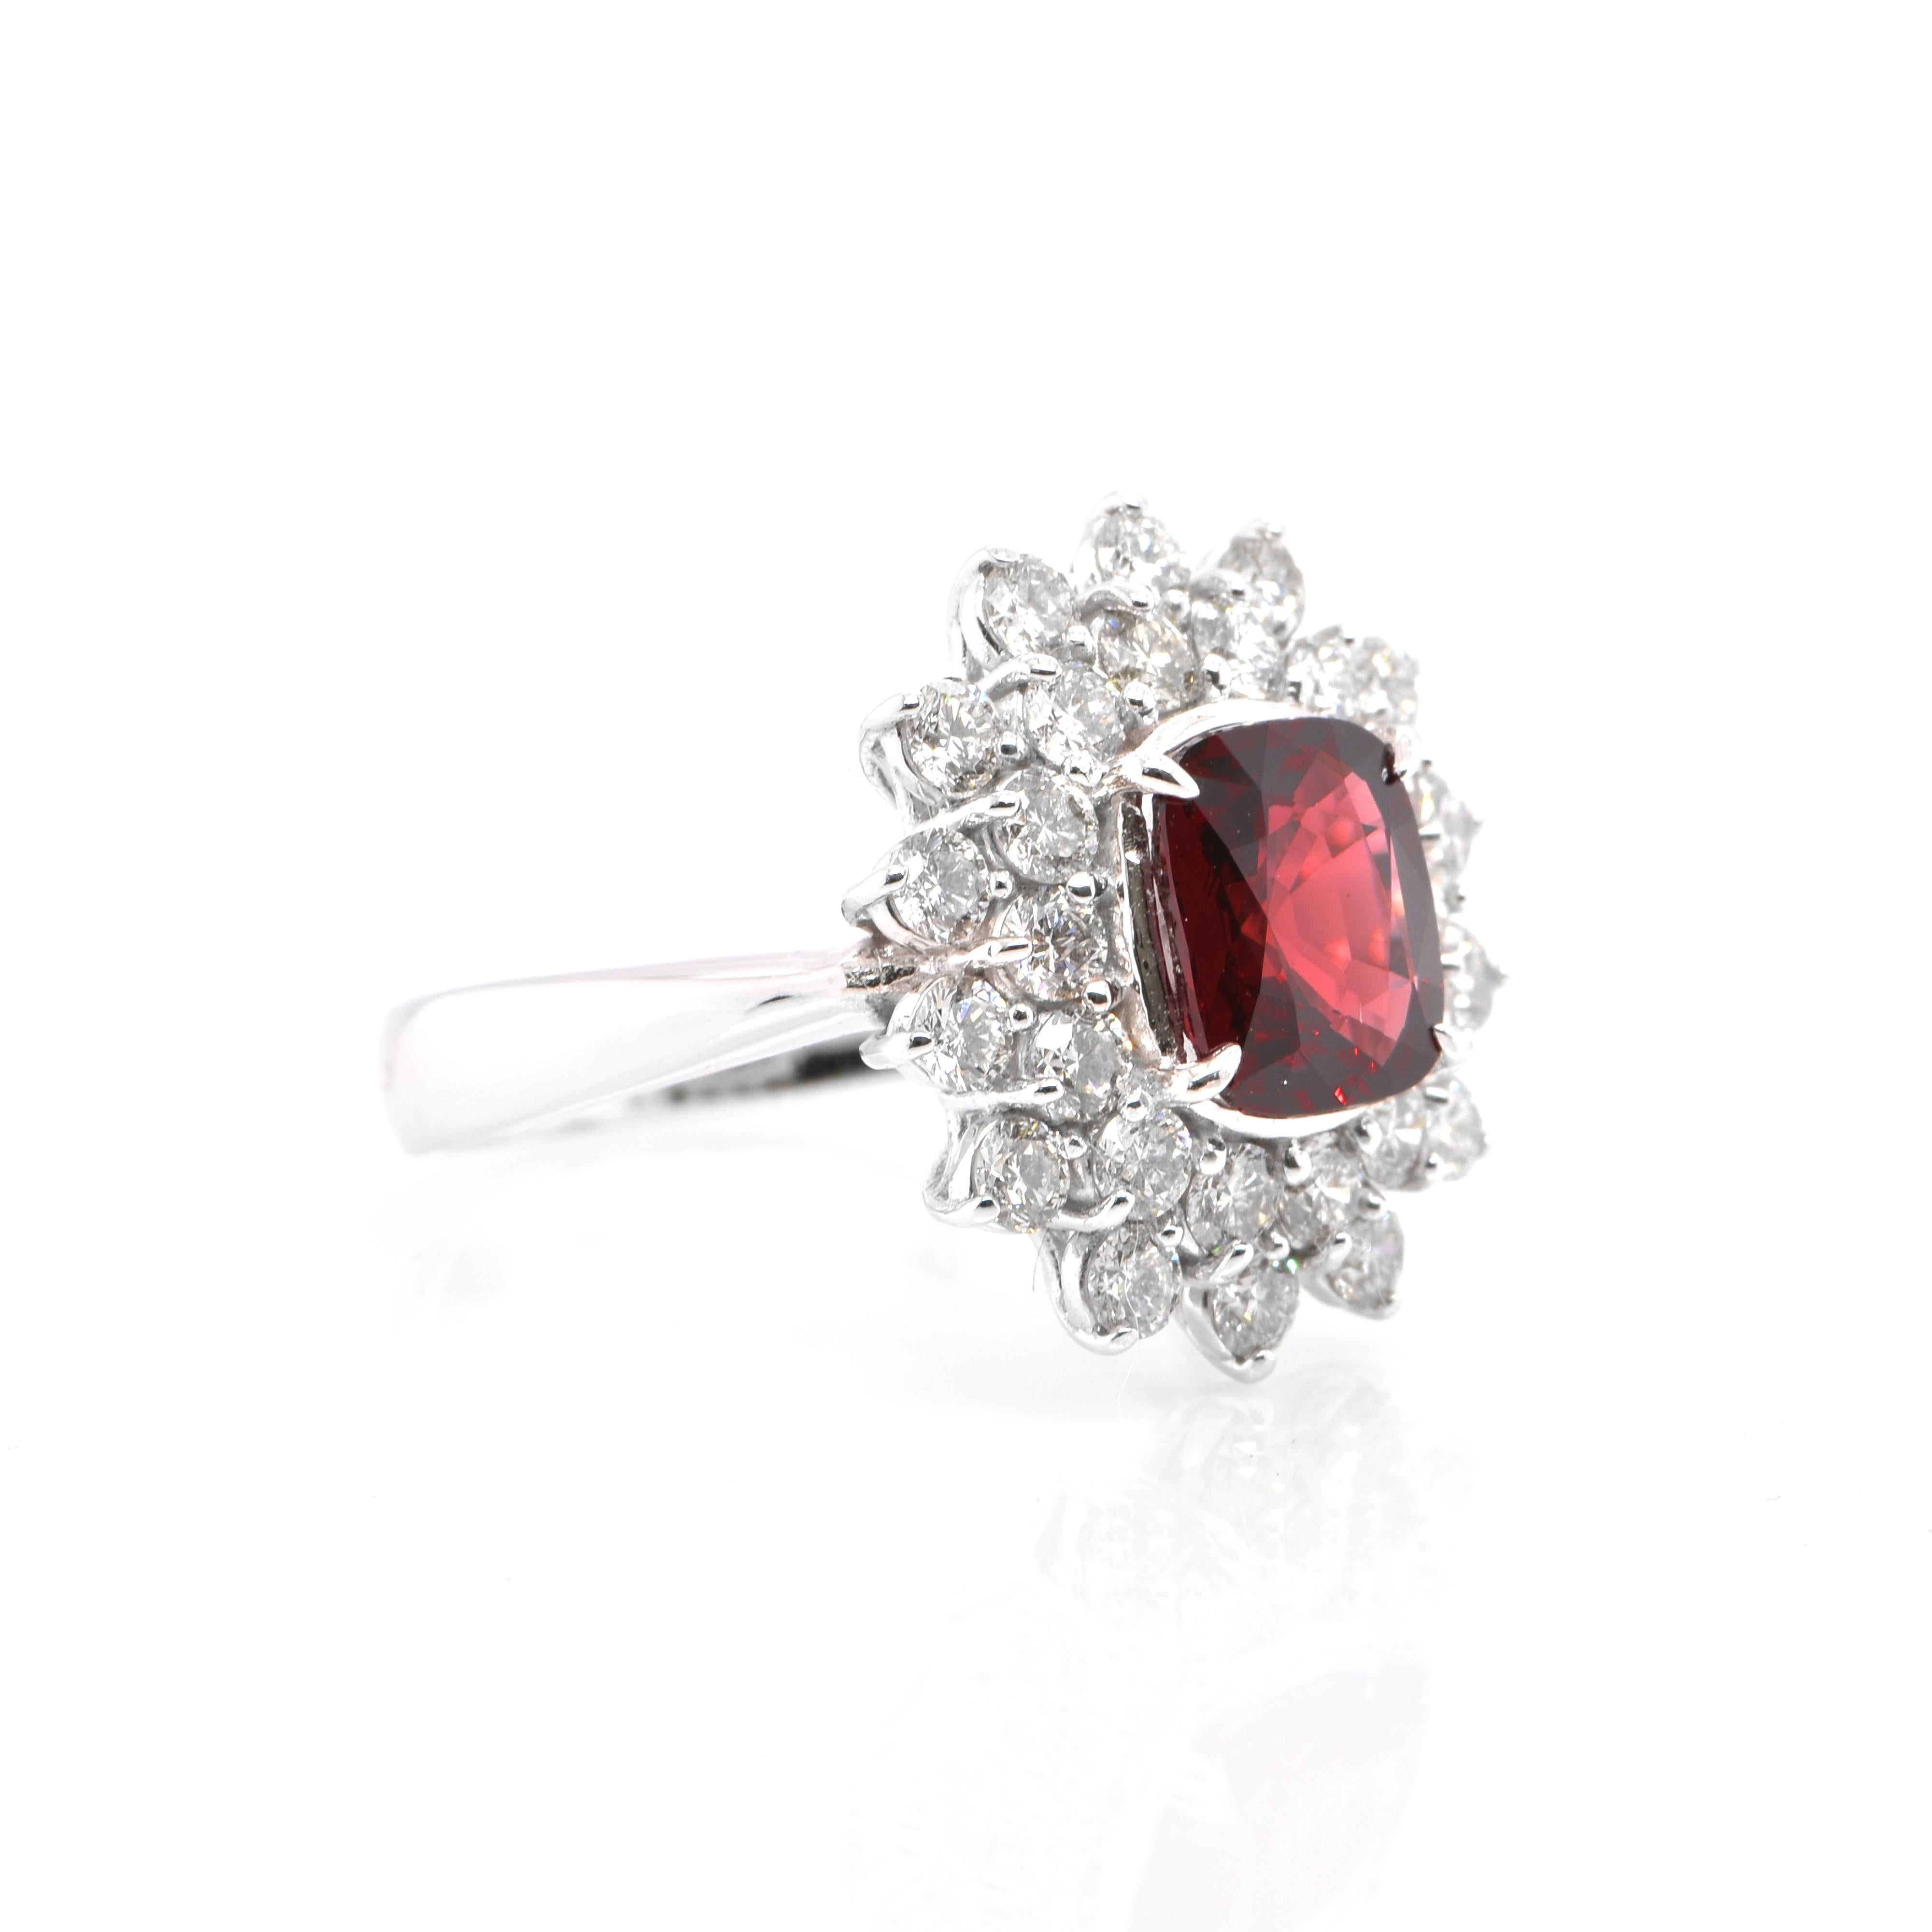 Modern GIA Certified 2.09 Carat Natural Untreated Red Spinel Double Halo Ring